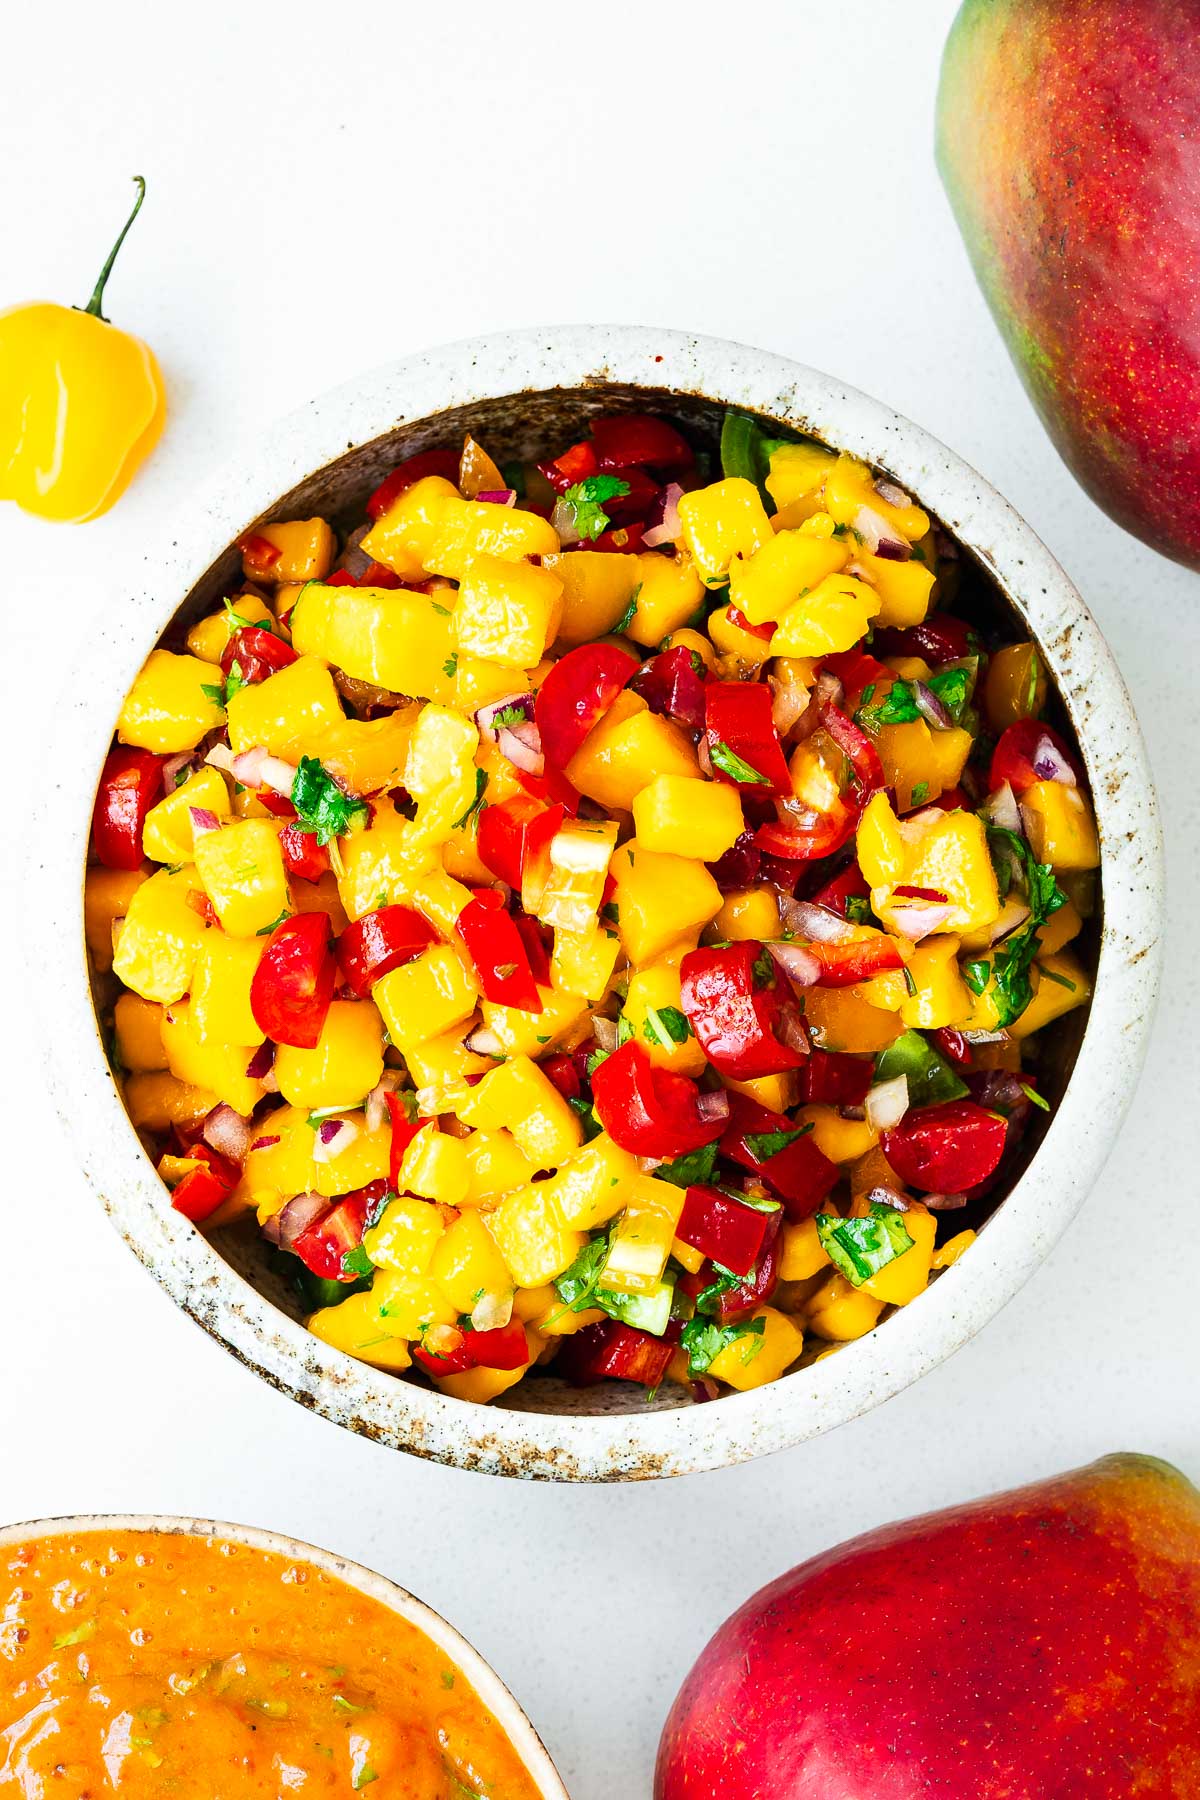 A bowl with fresh mango habanero salsa alongside a bowl of roasted mango habanero salsa surrounded by fresh mangoes and habanero peppers.